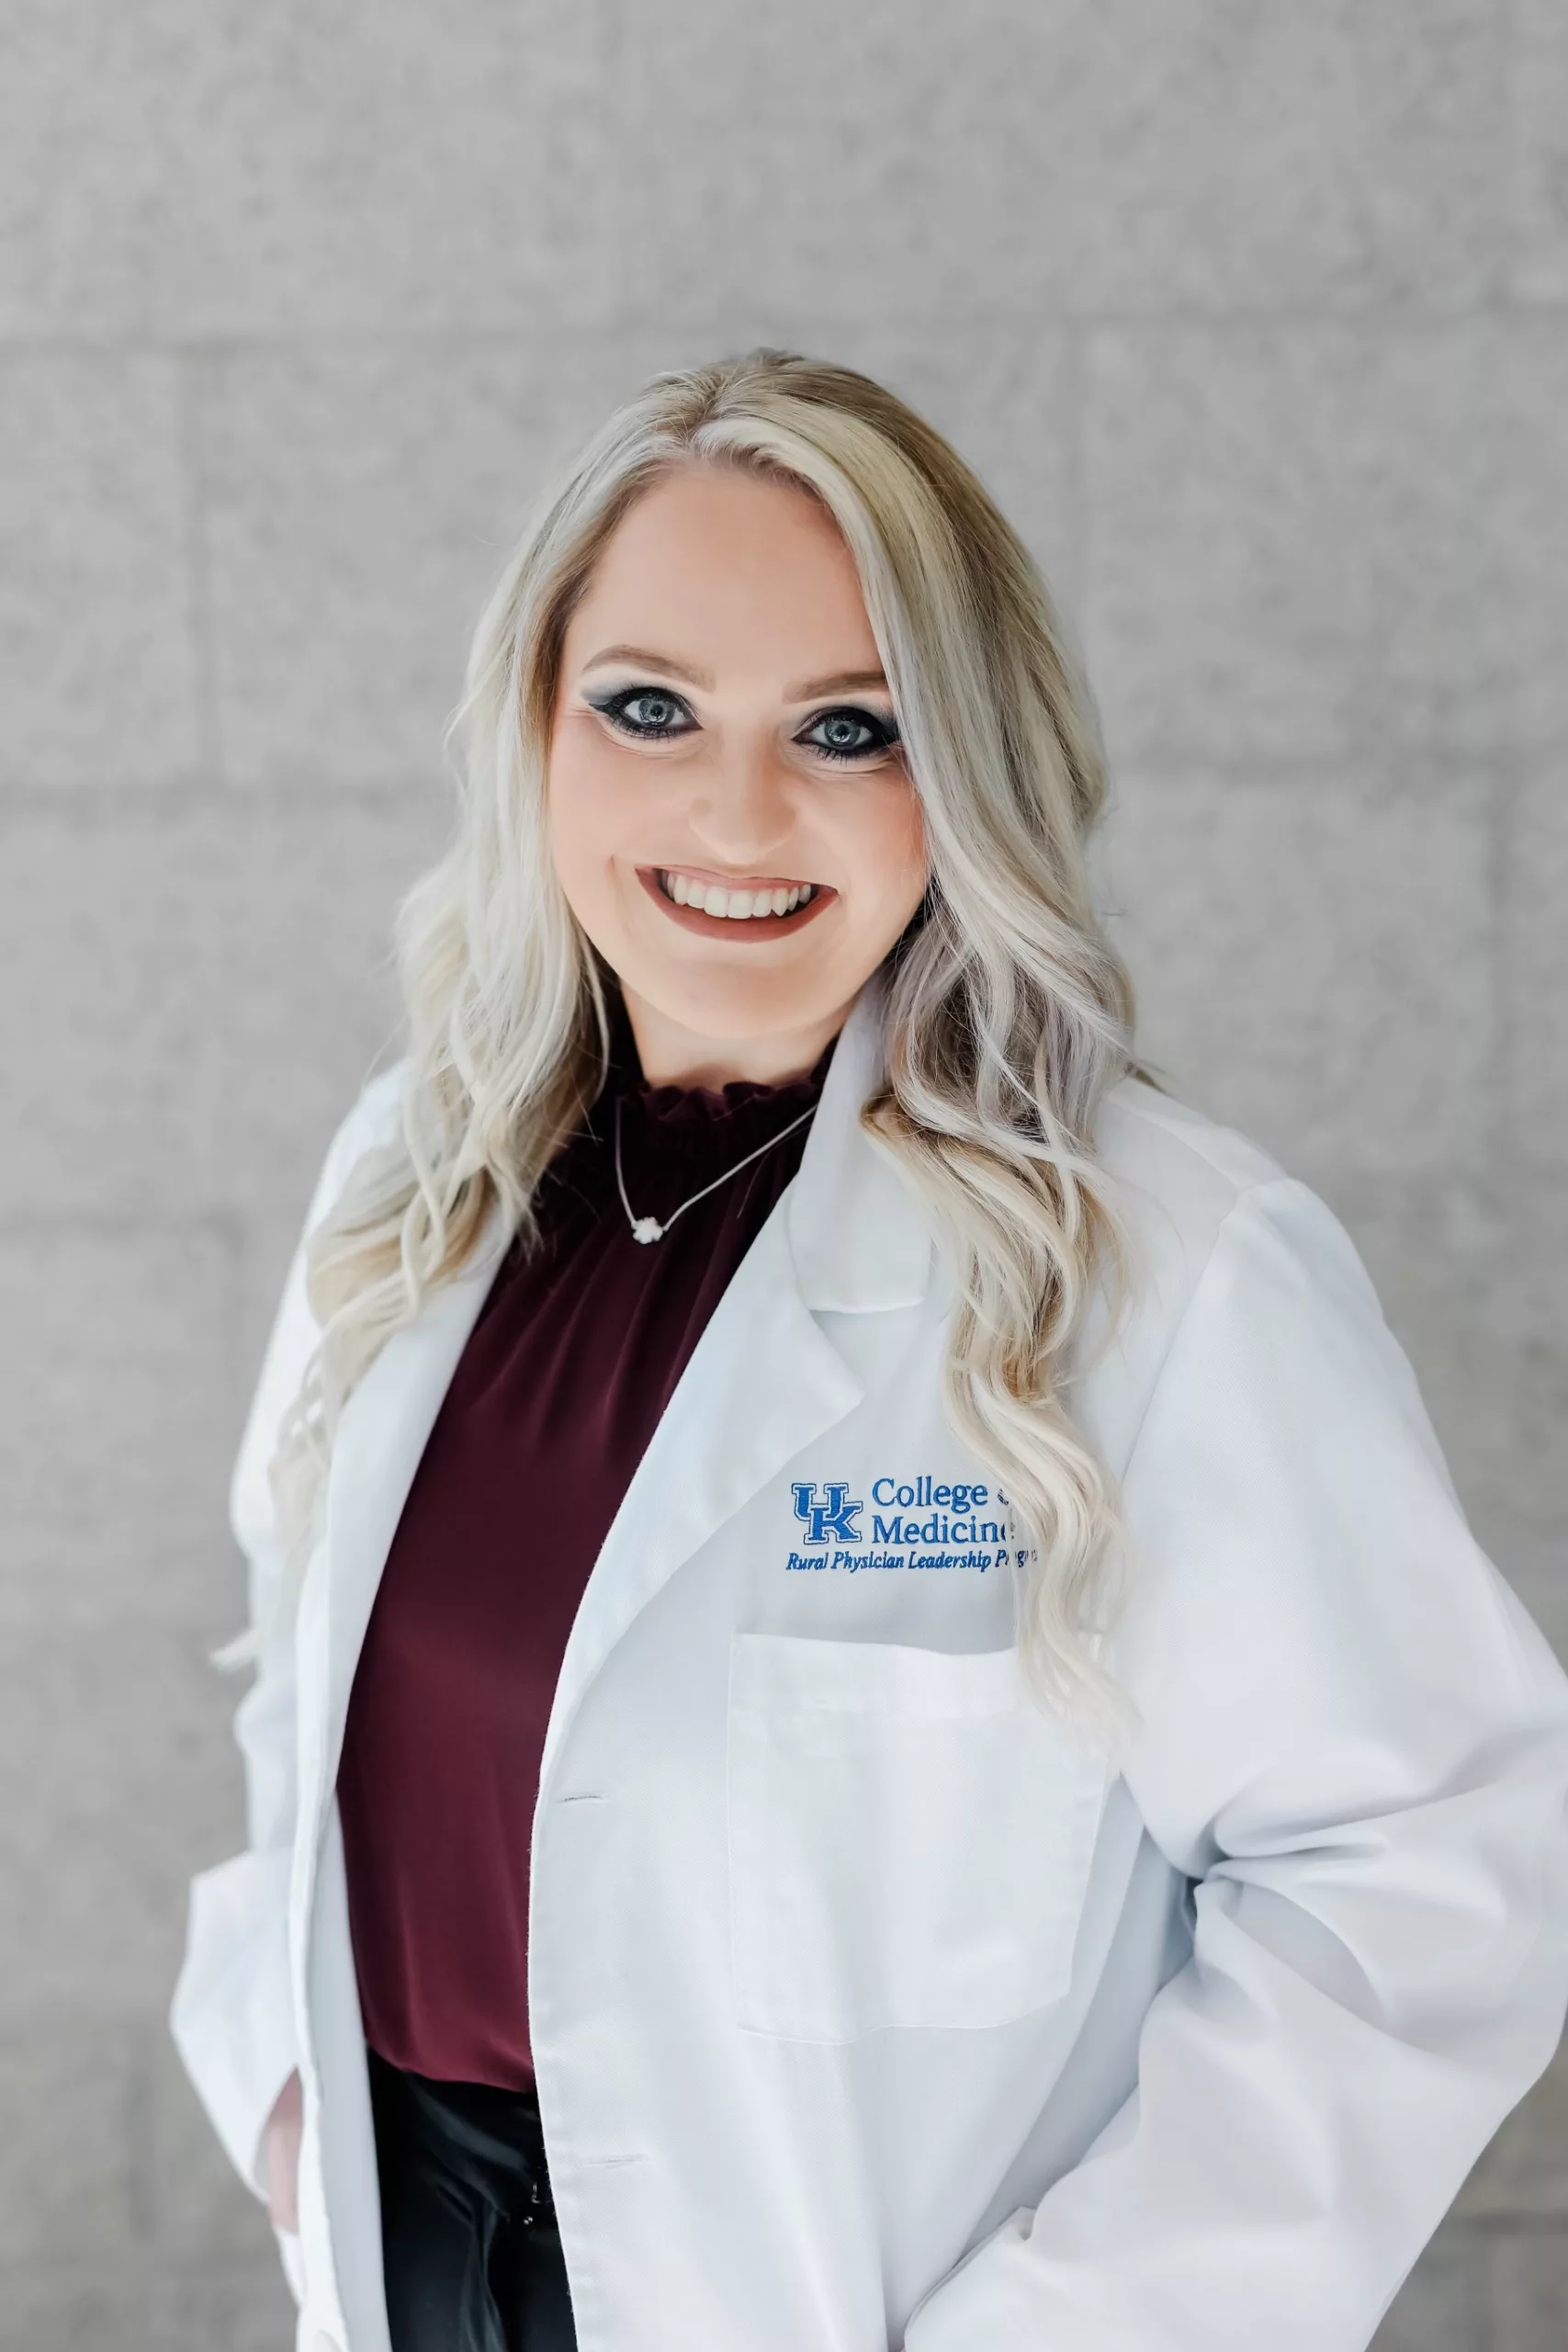 New UK medical-school graduate plans to pay it forward with a career in rural Kentucky, which needs many more physicians